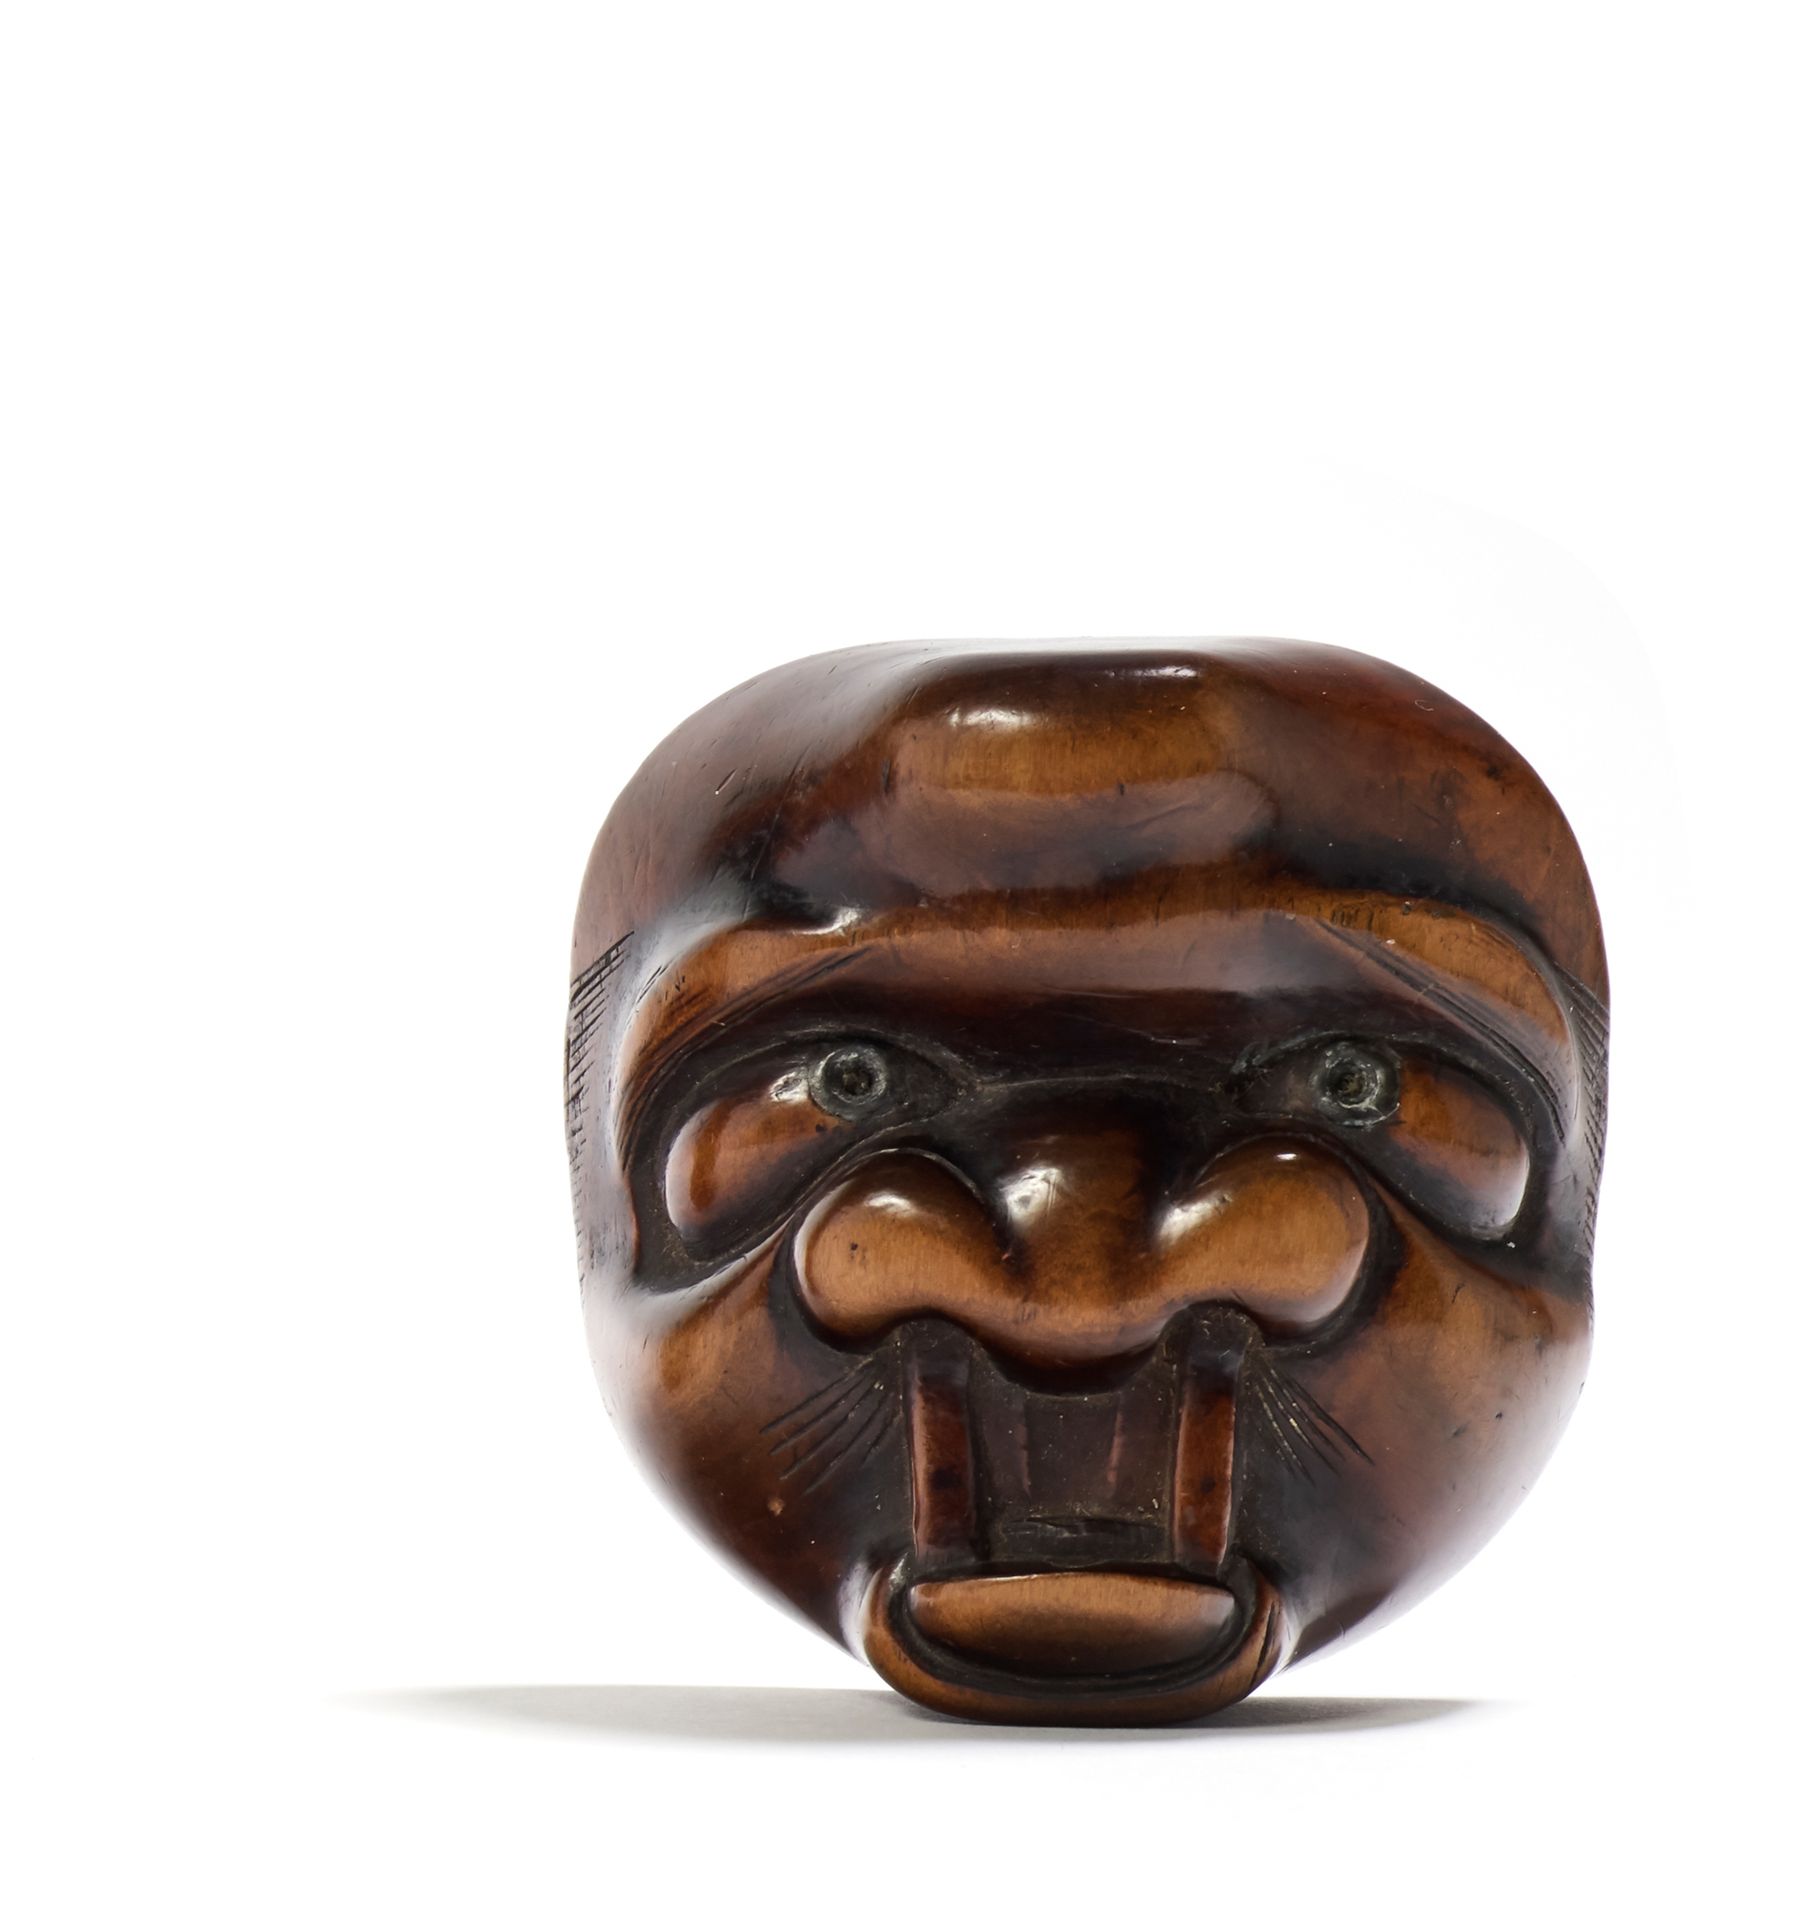 JAPON - XIXE SIÈCLE Wooden netsuke, mask
D'Hanatare with prominent forehead. Met&hellip;